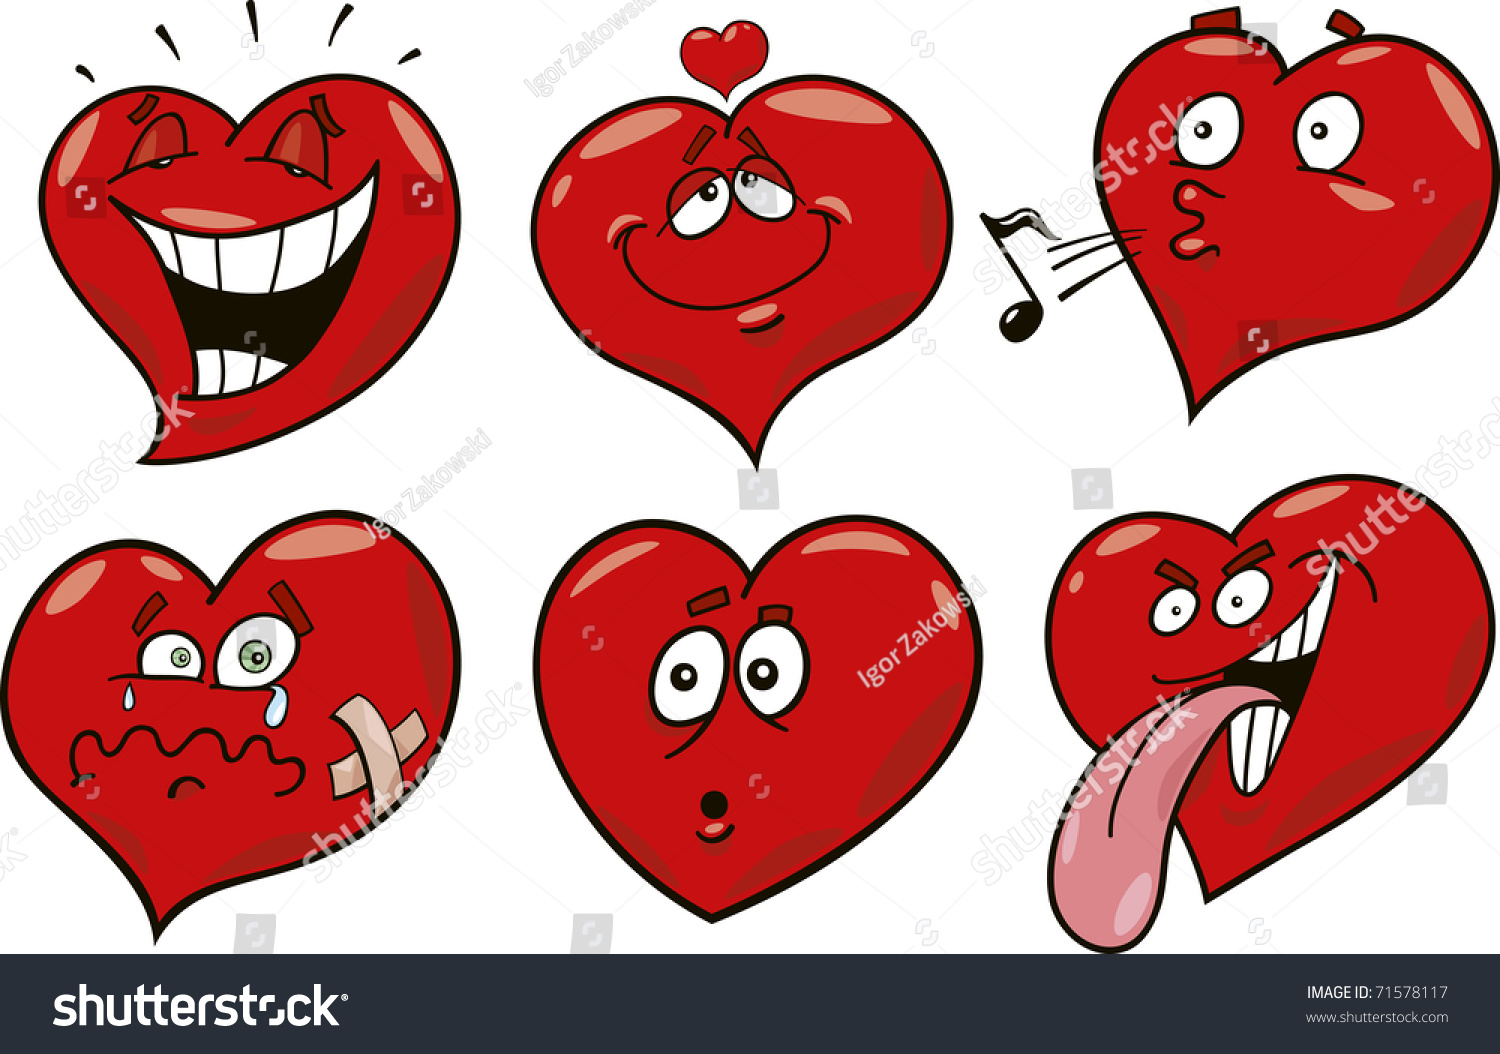 Cartoon Illustration Of Funny Hearts Collection 71578117 Shutterstock 